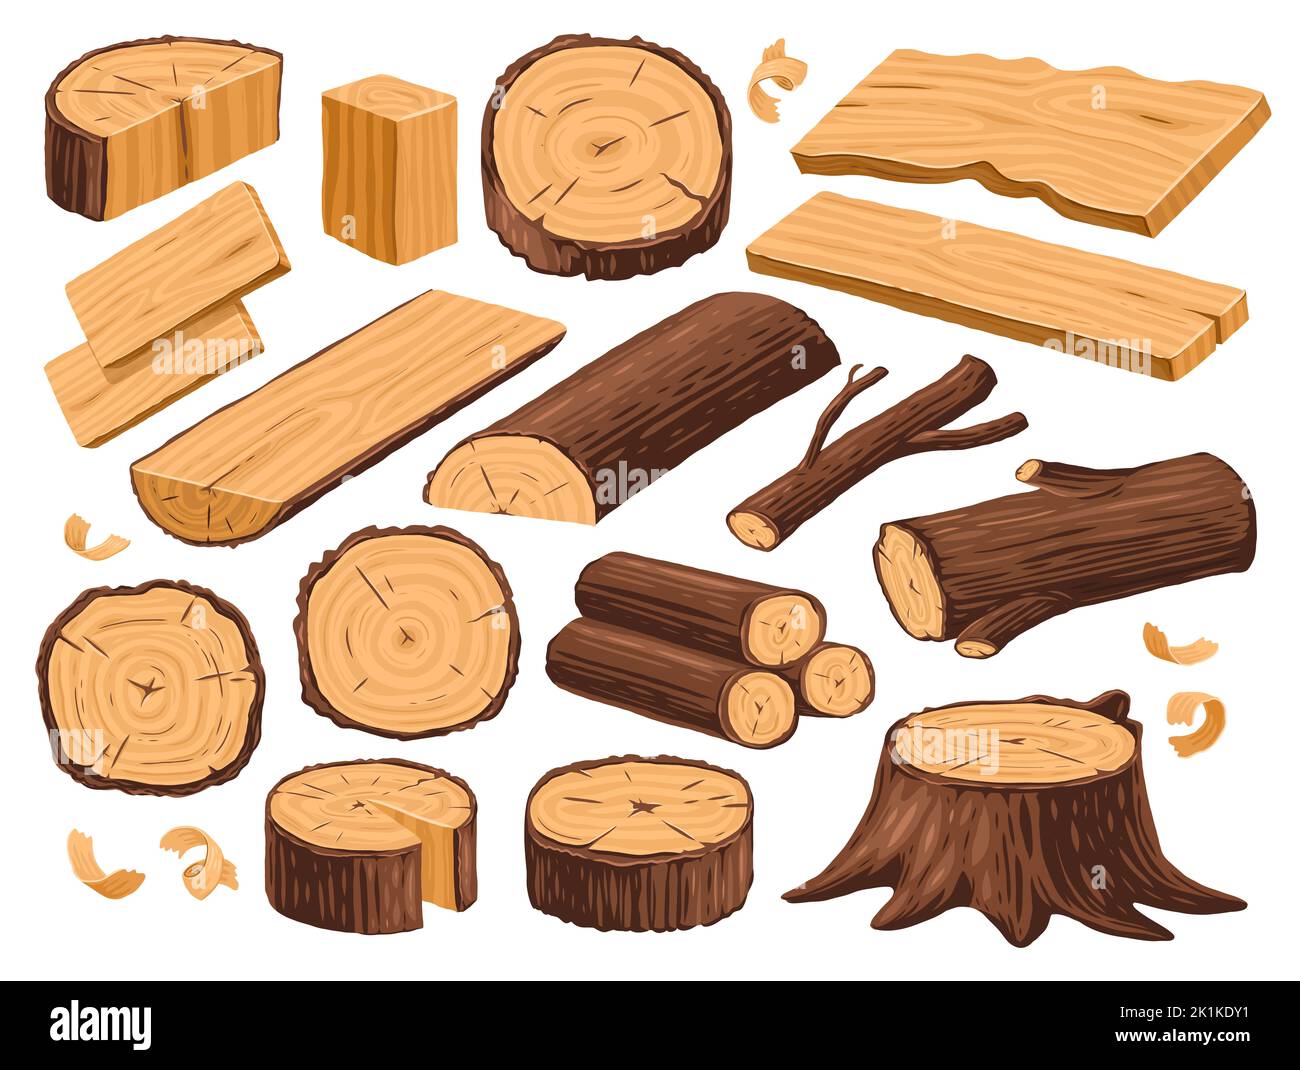 Tree stump, wooden logs and timber materials. Natural lumber, carpentry wood materials set. Wooden plank, billet Stock Photo